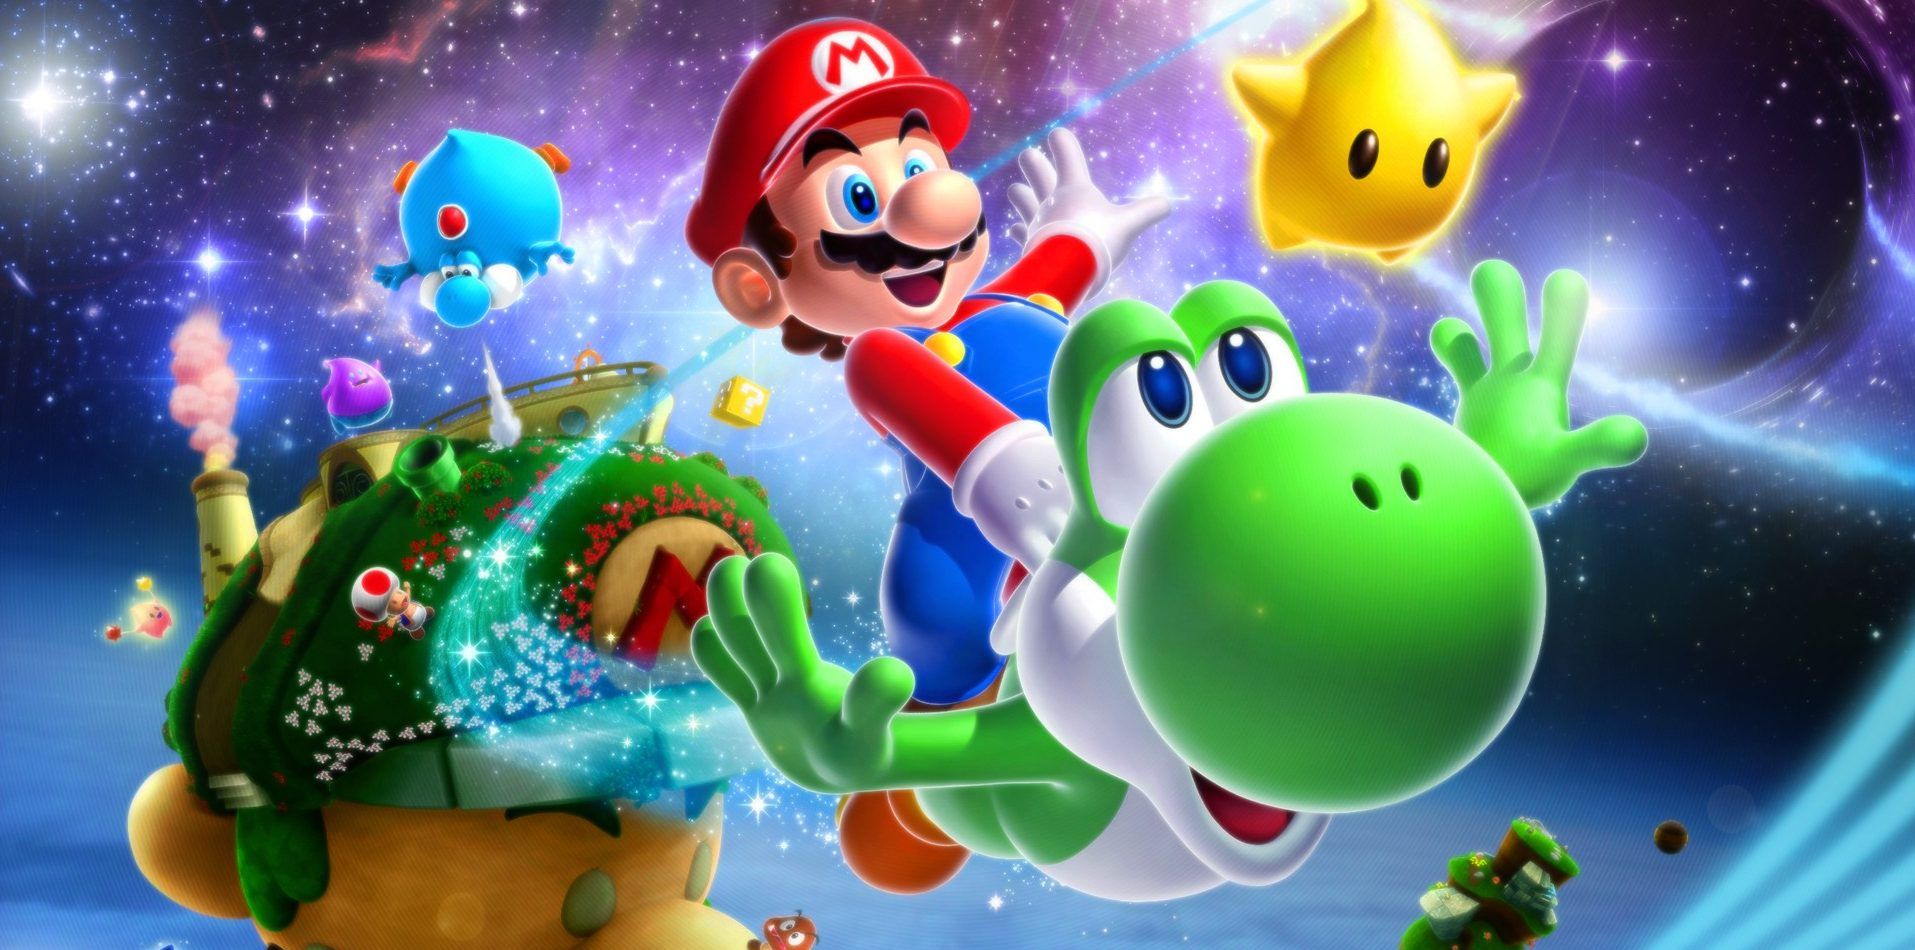 How The Rumored Super Mario Galaxy Switch Port Would Work